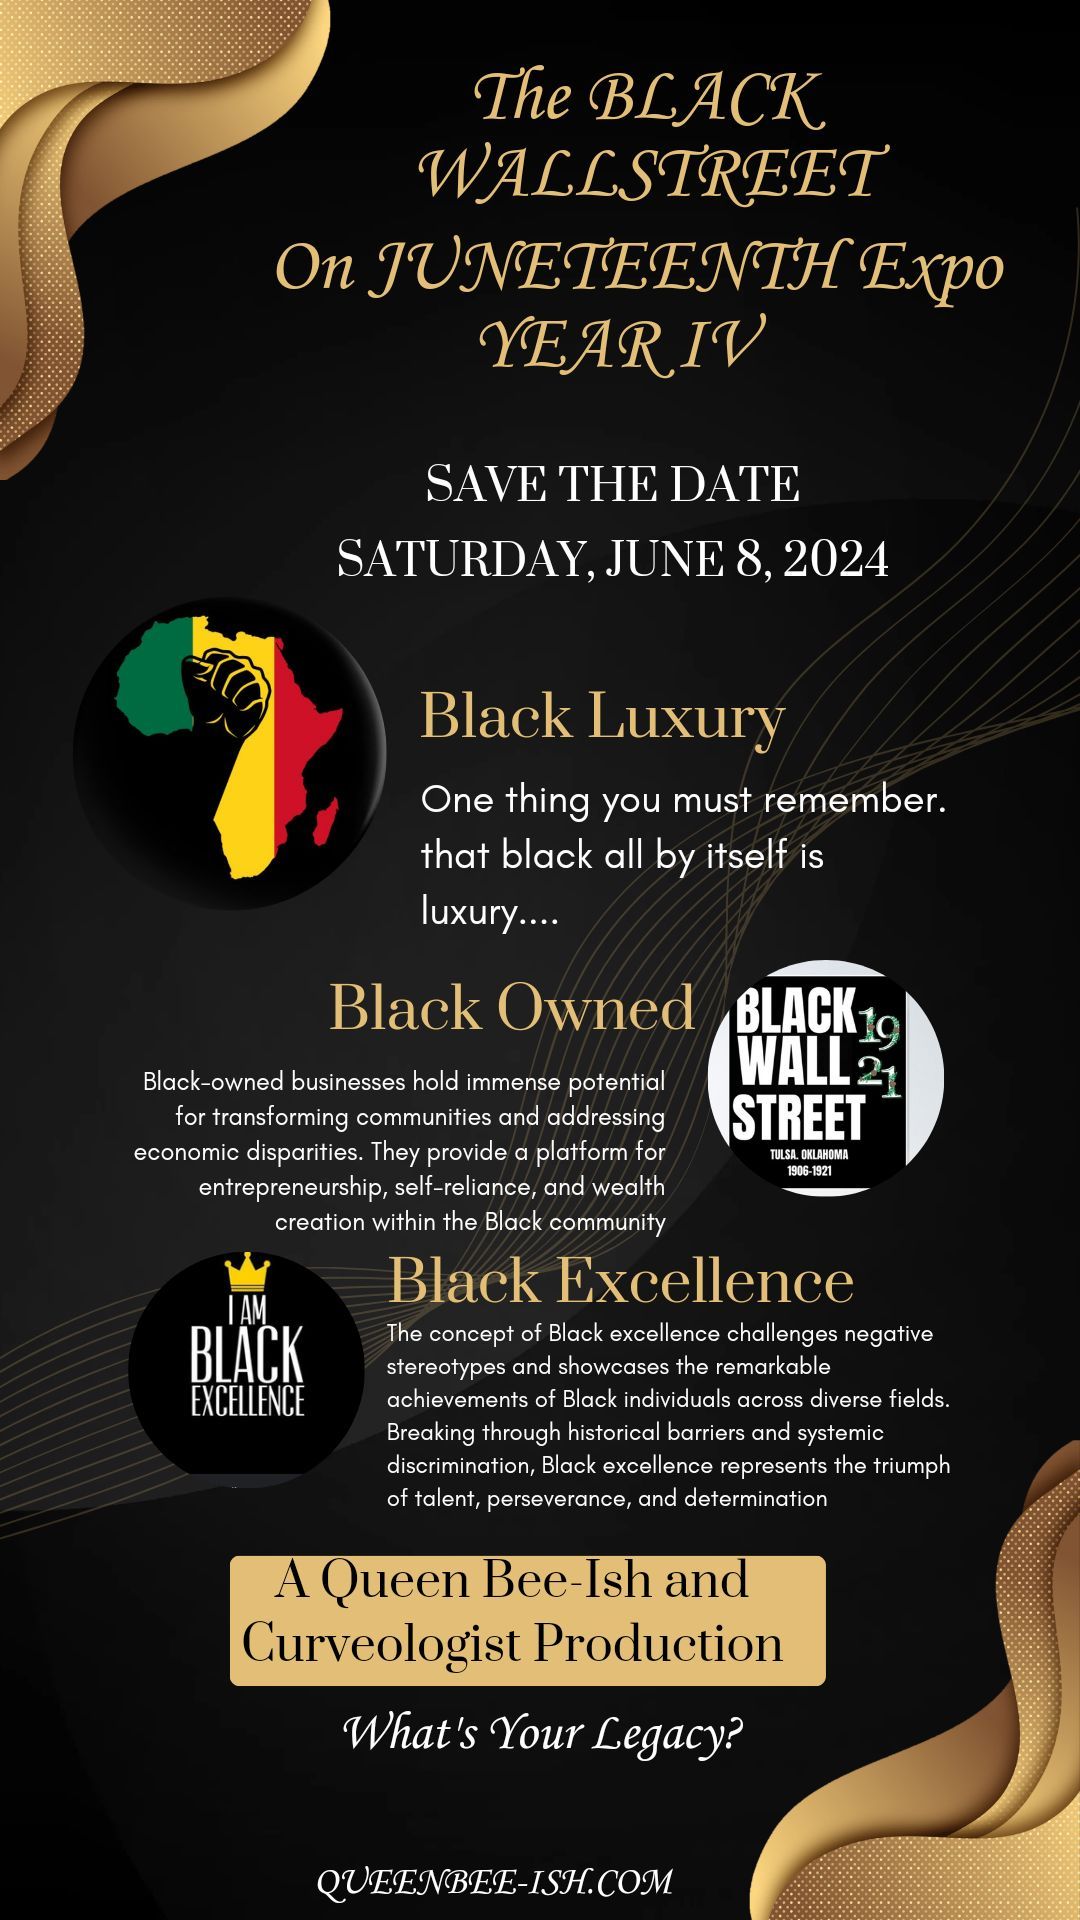 The BLACK WALLSTREET ON JUNETEENTH YEAR IV EXPO 